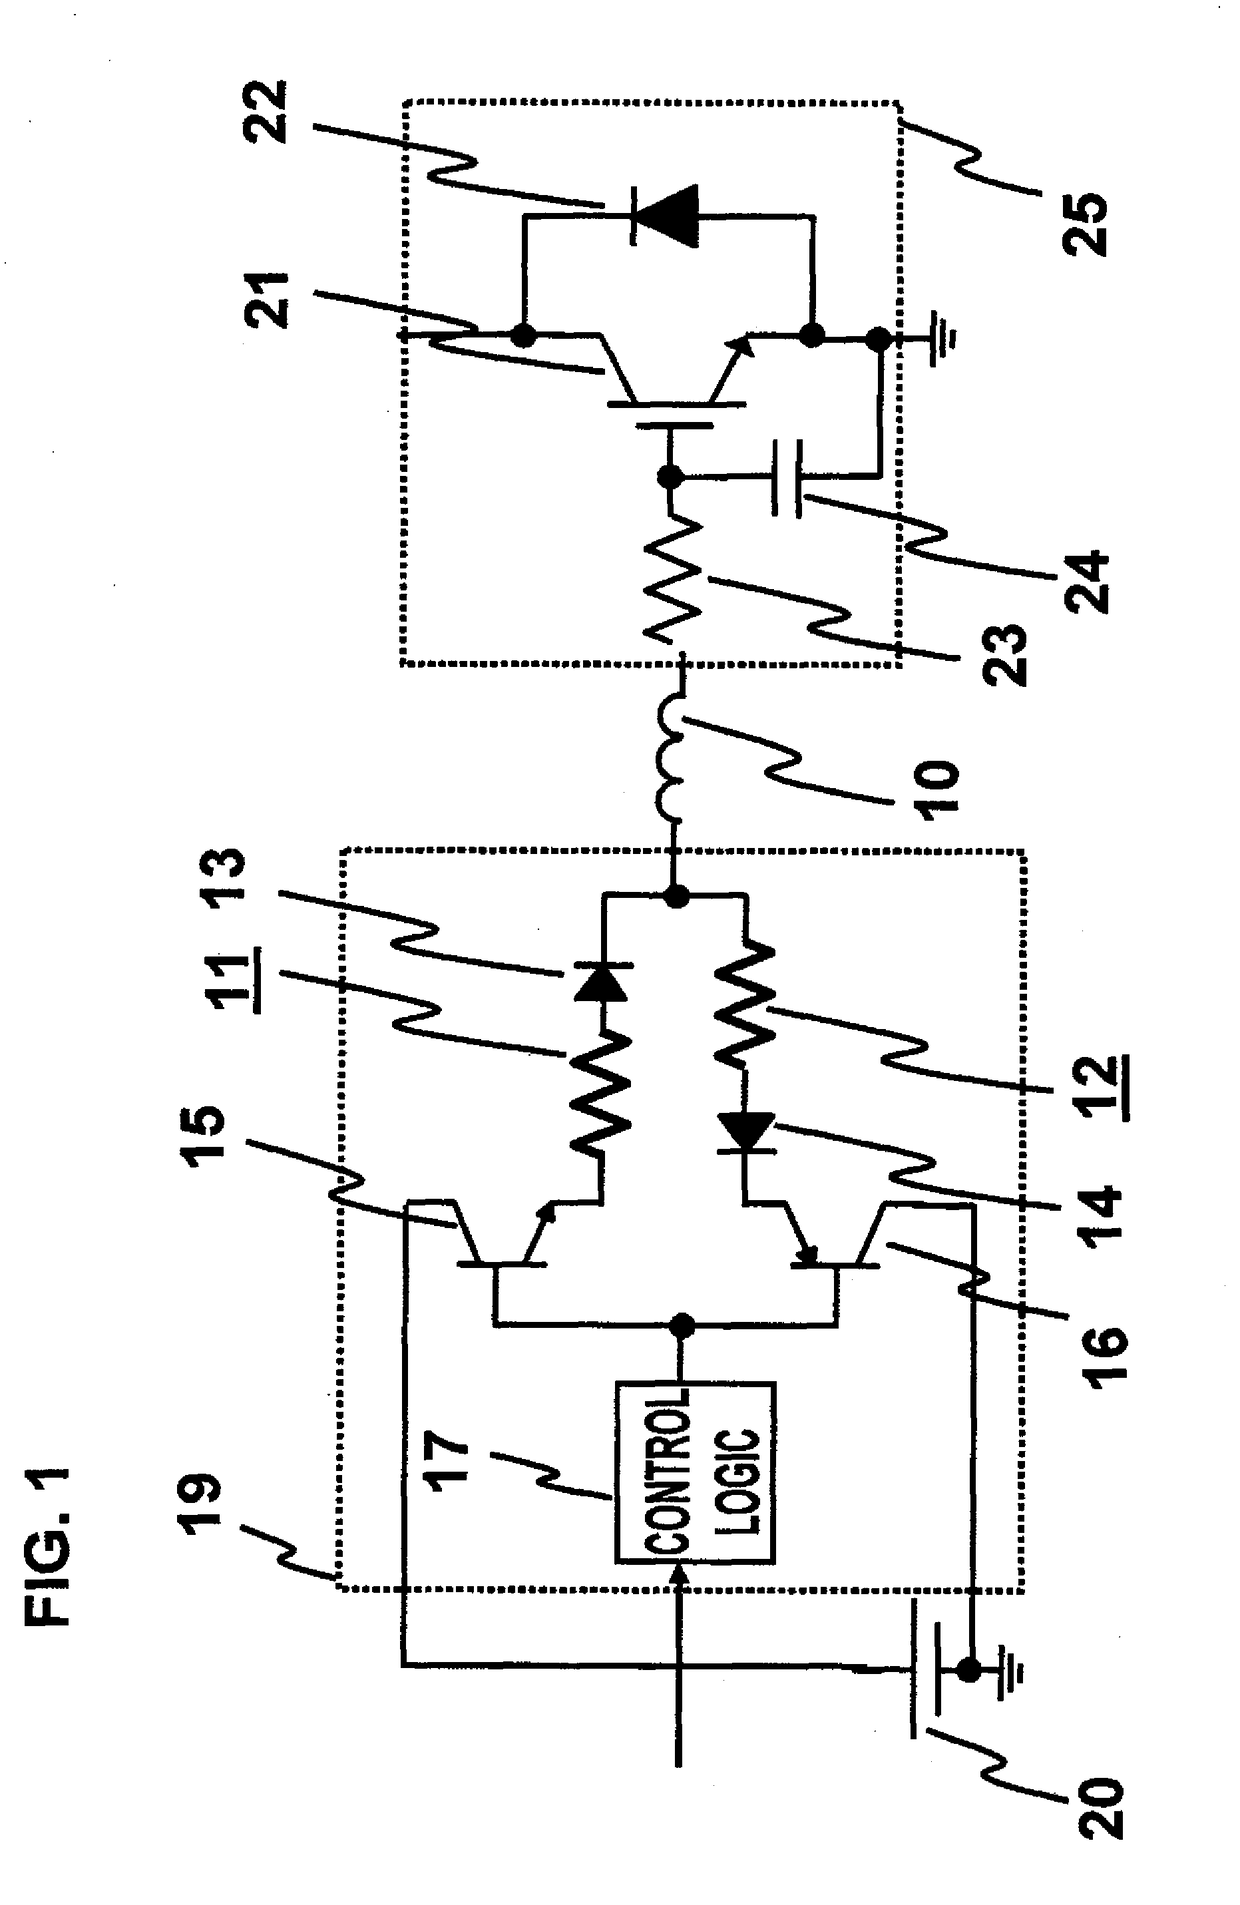 Drive circuit of semiconductor device